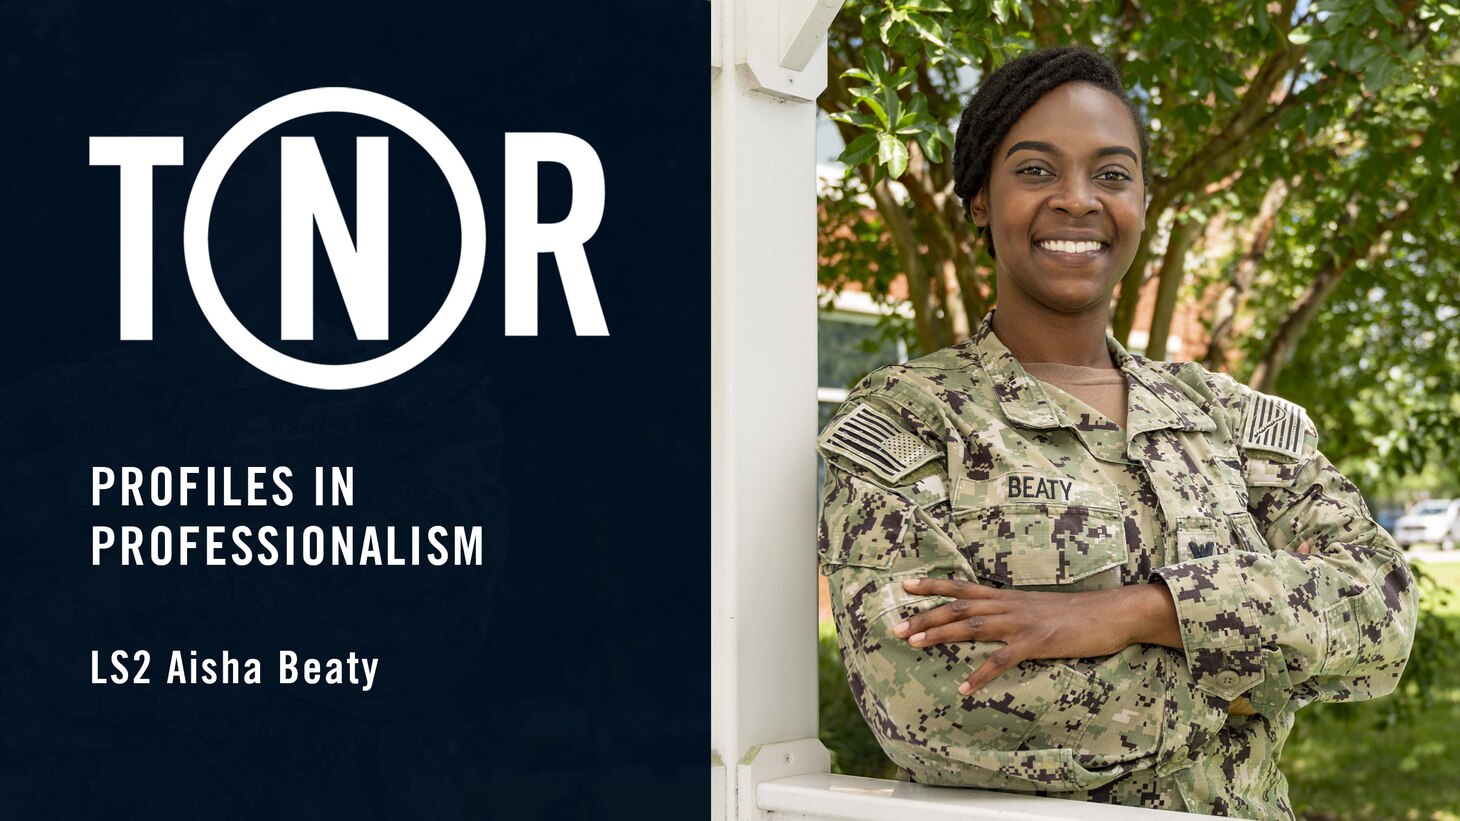 When Logistics Specialist 2nd Class Aisha Beaty first joined the Navy, she was an operations specialist aboard the Nimitz-class aircraft carrier USS Carl Vinson (CVN 70). The darkness of the ship’s combat direction center was her norm. She spent much of her workday monitoring a console under blue light, ensuring there were no threats to the ship and its Sailors.